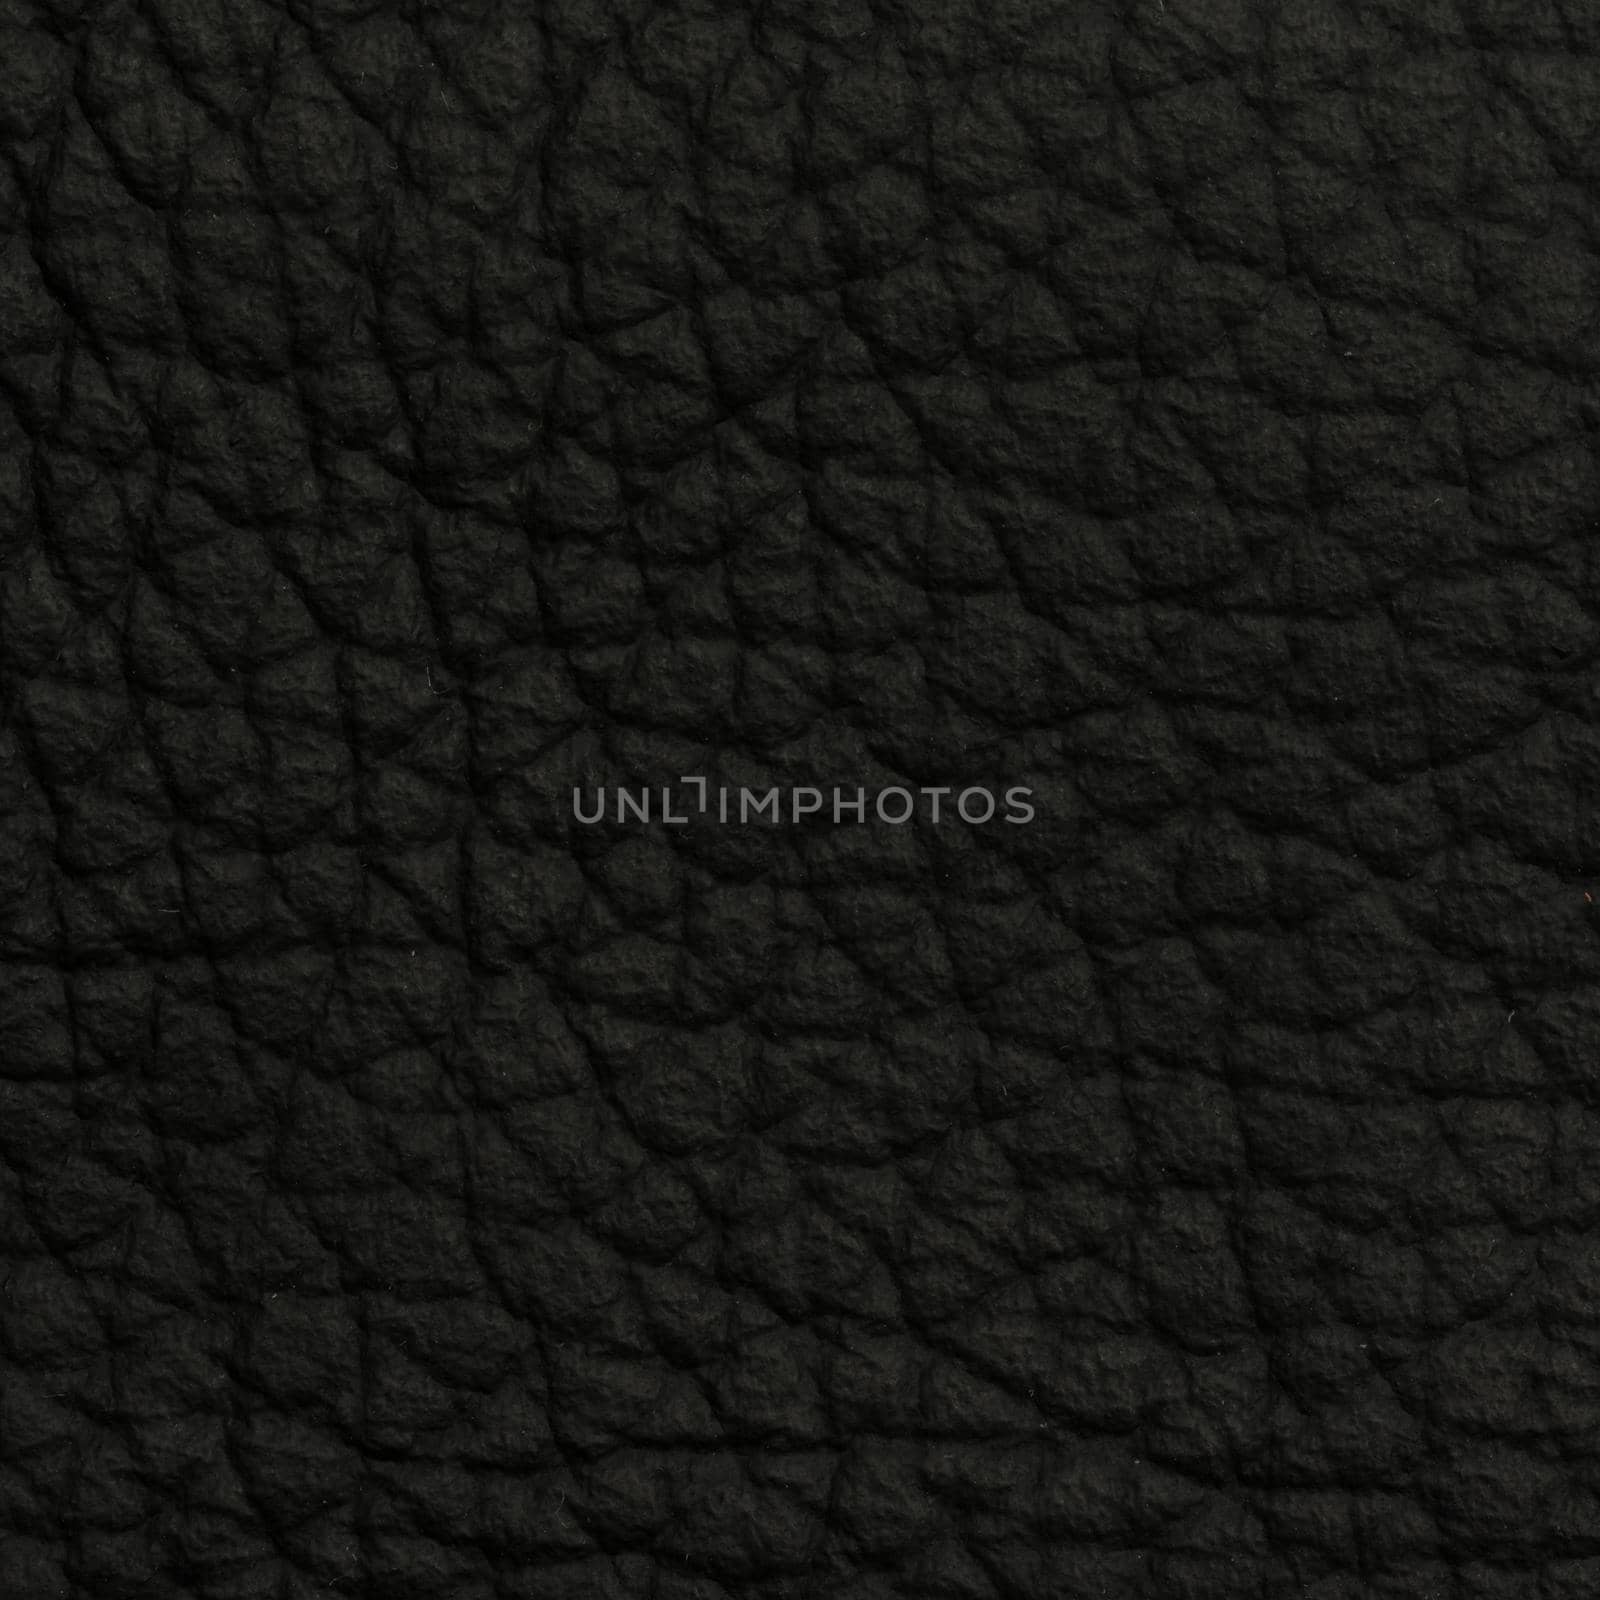 Leather texture for background by nikitabuida